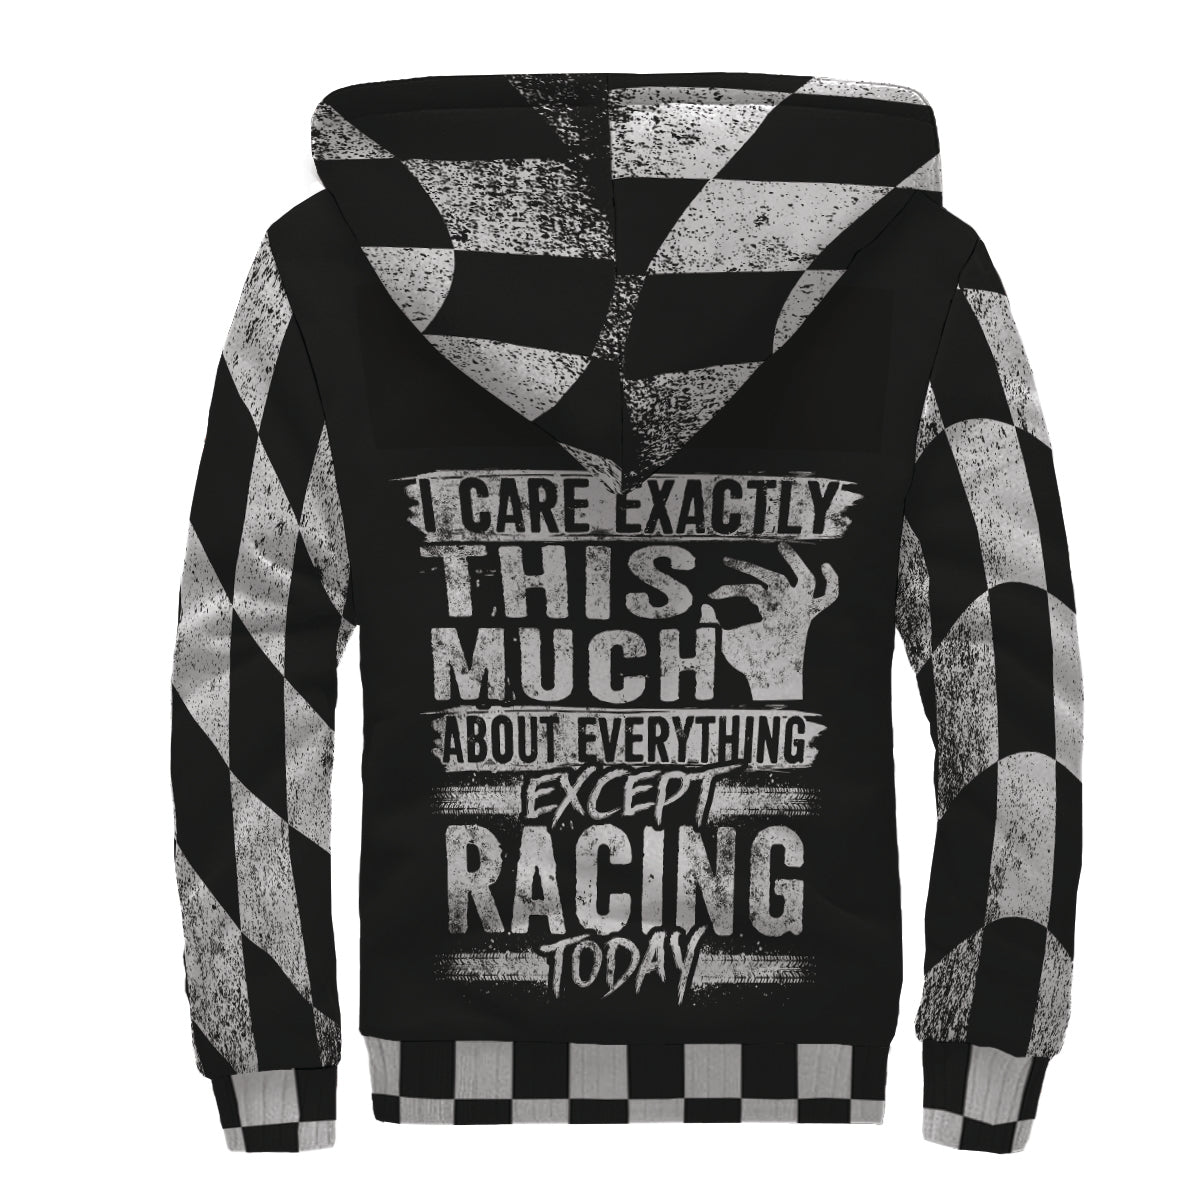 I Care Exactly This Much about anything except racing today Sherpa Jacket